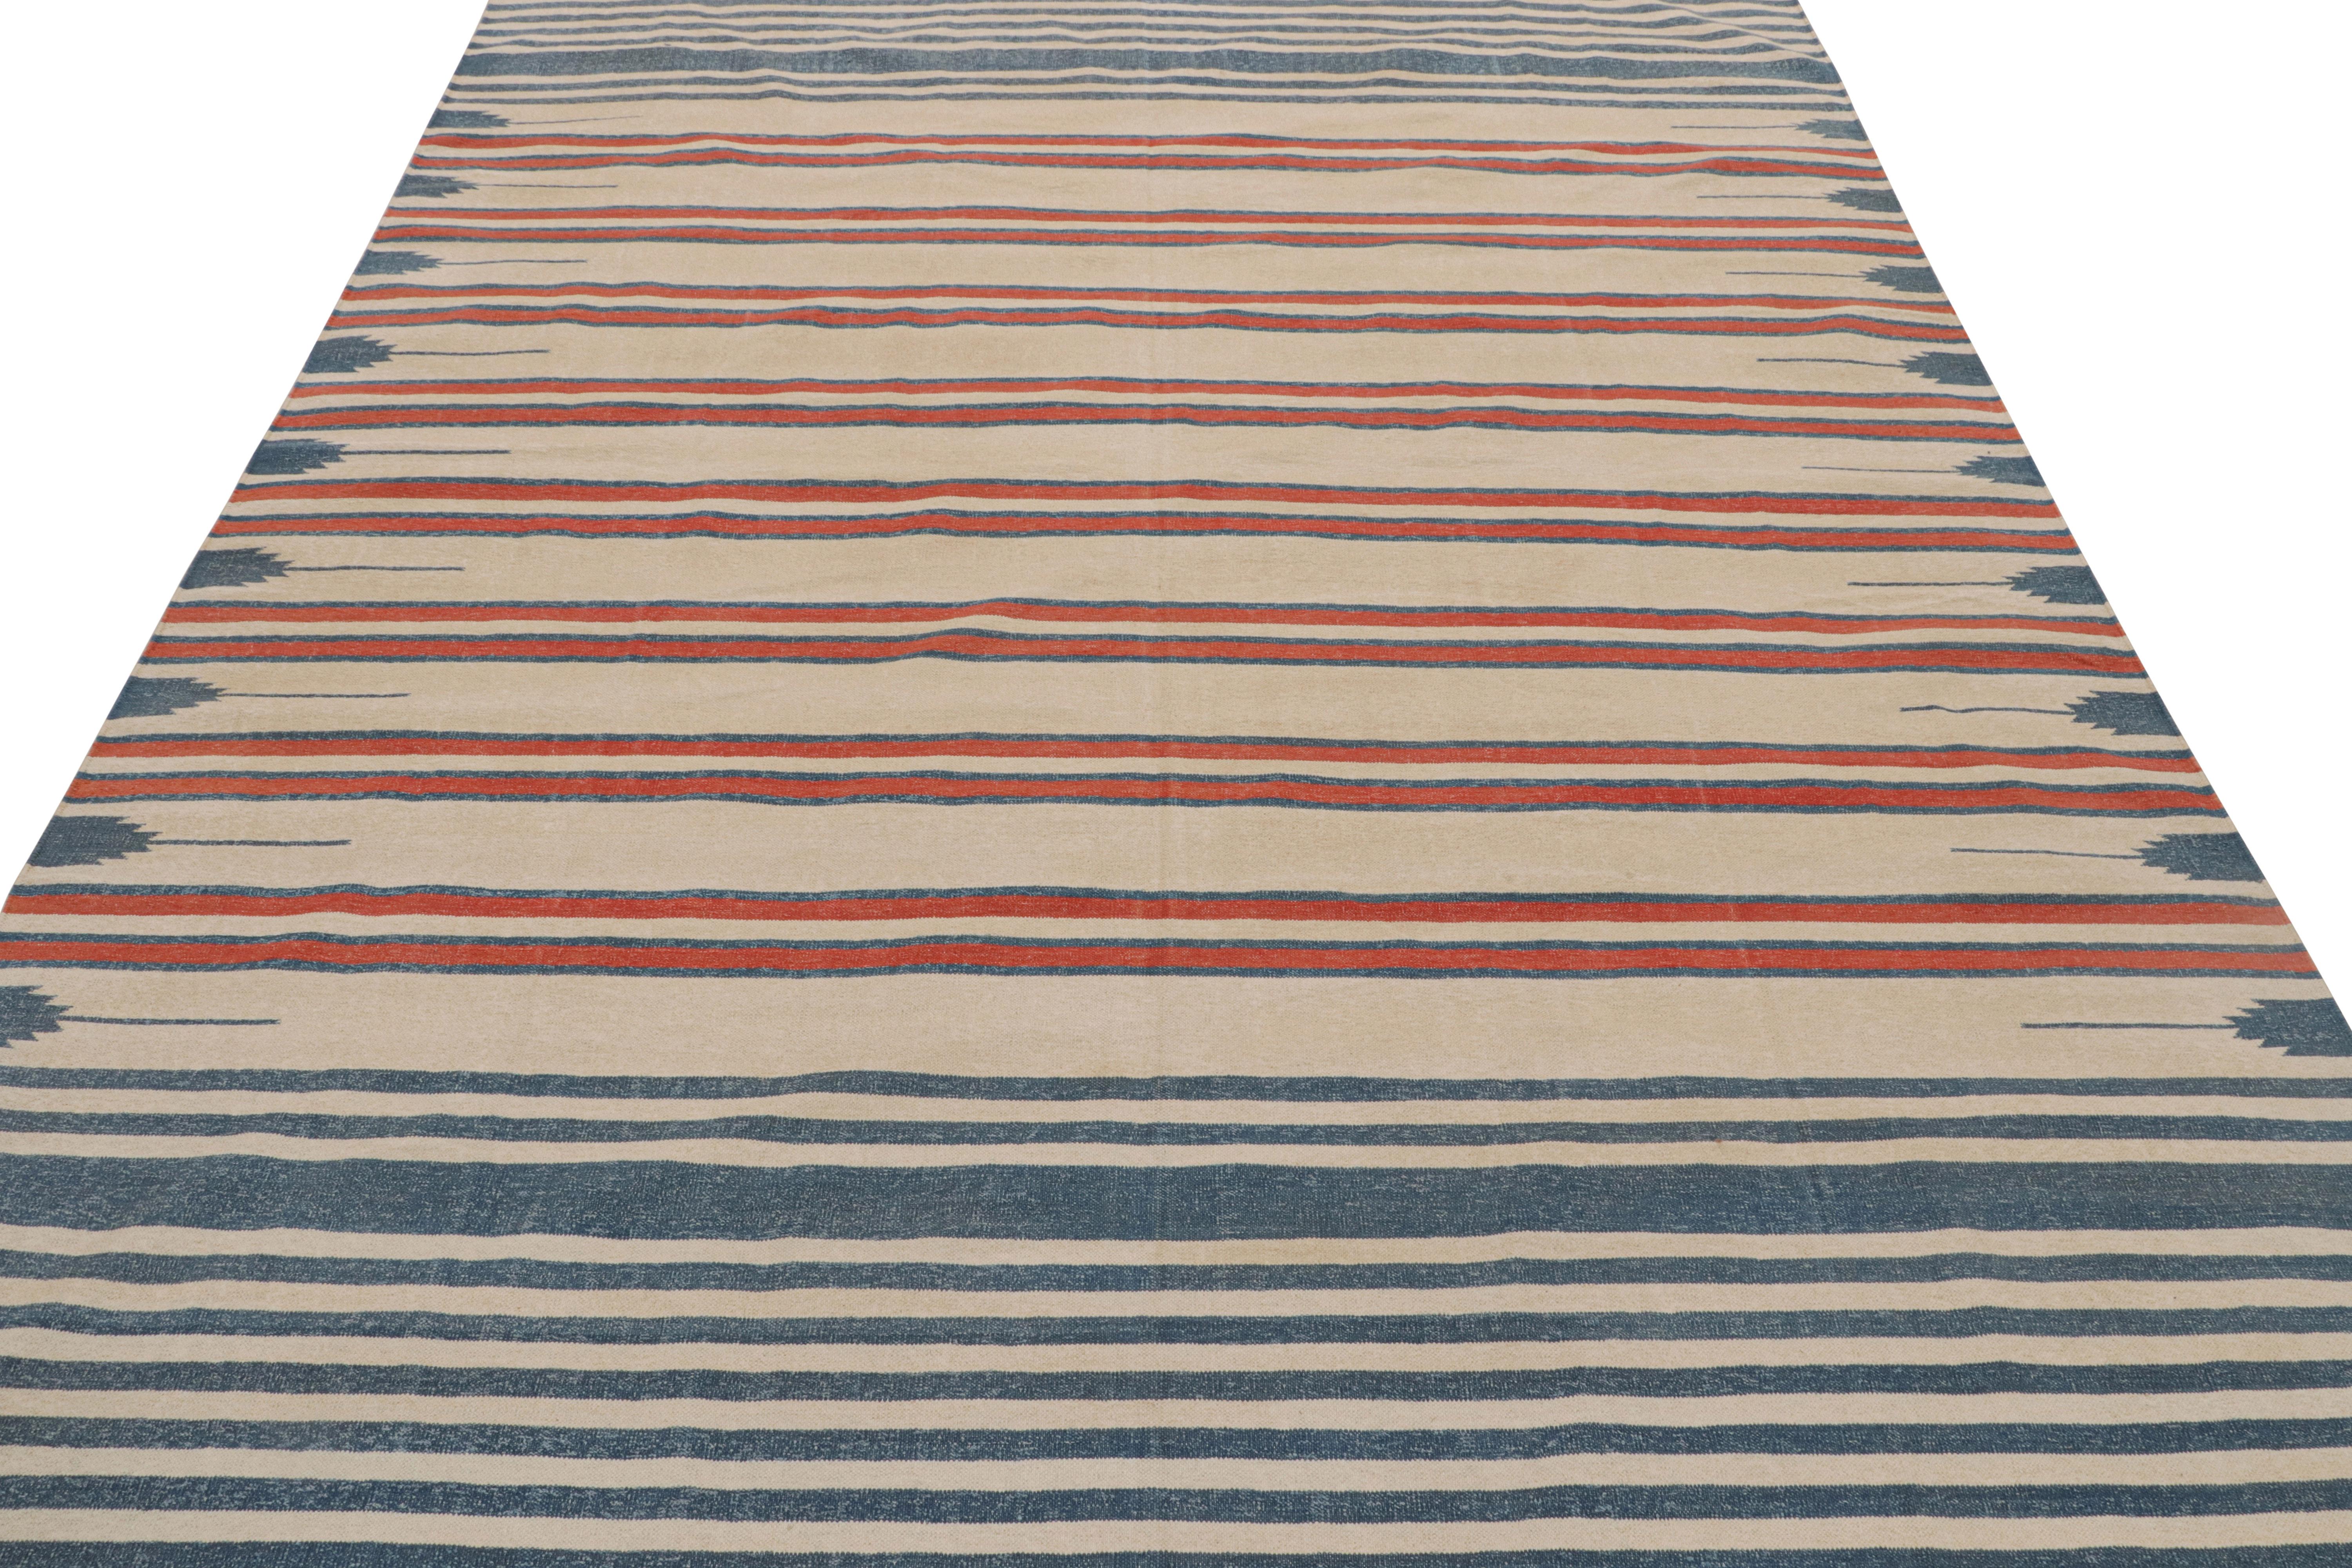 Hand-Woven Rug & Kilim’s Contemporary Dhurrie Rug with Beige, Red, Blue Stripes Red Accents For Sale